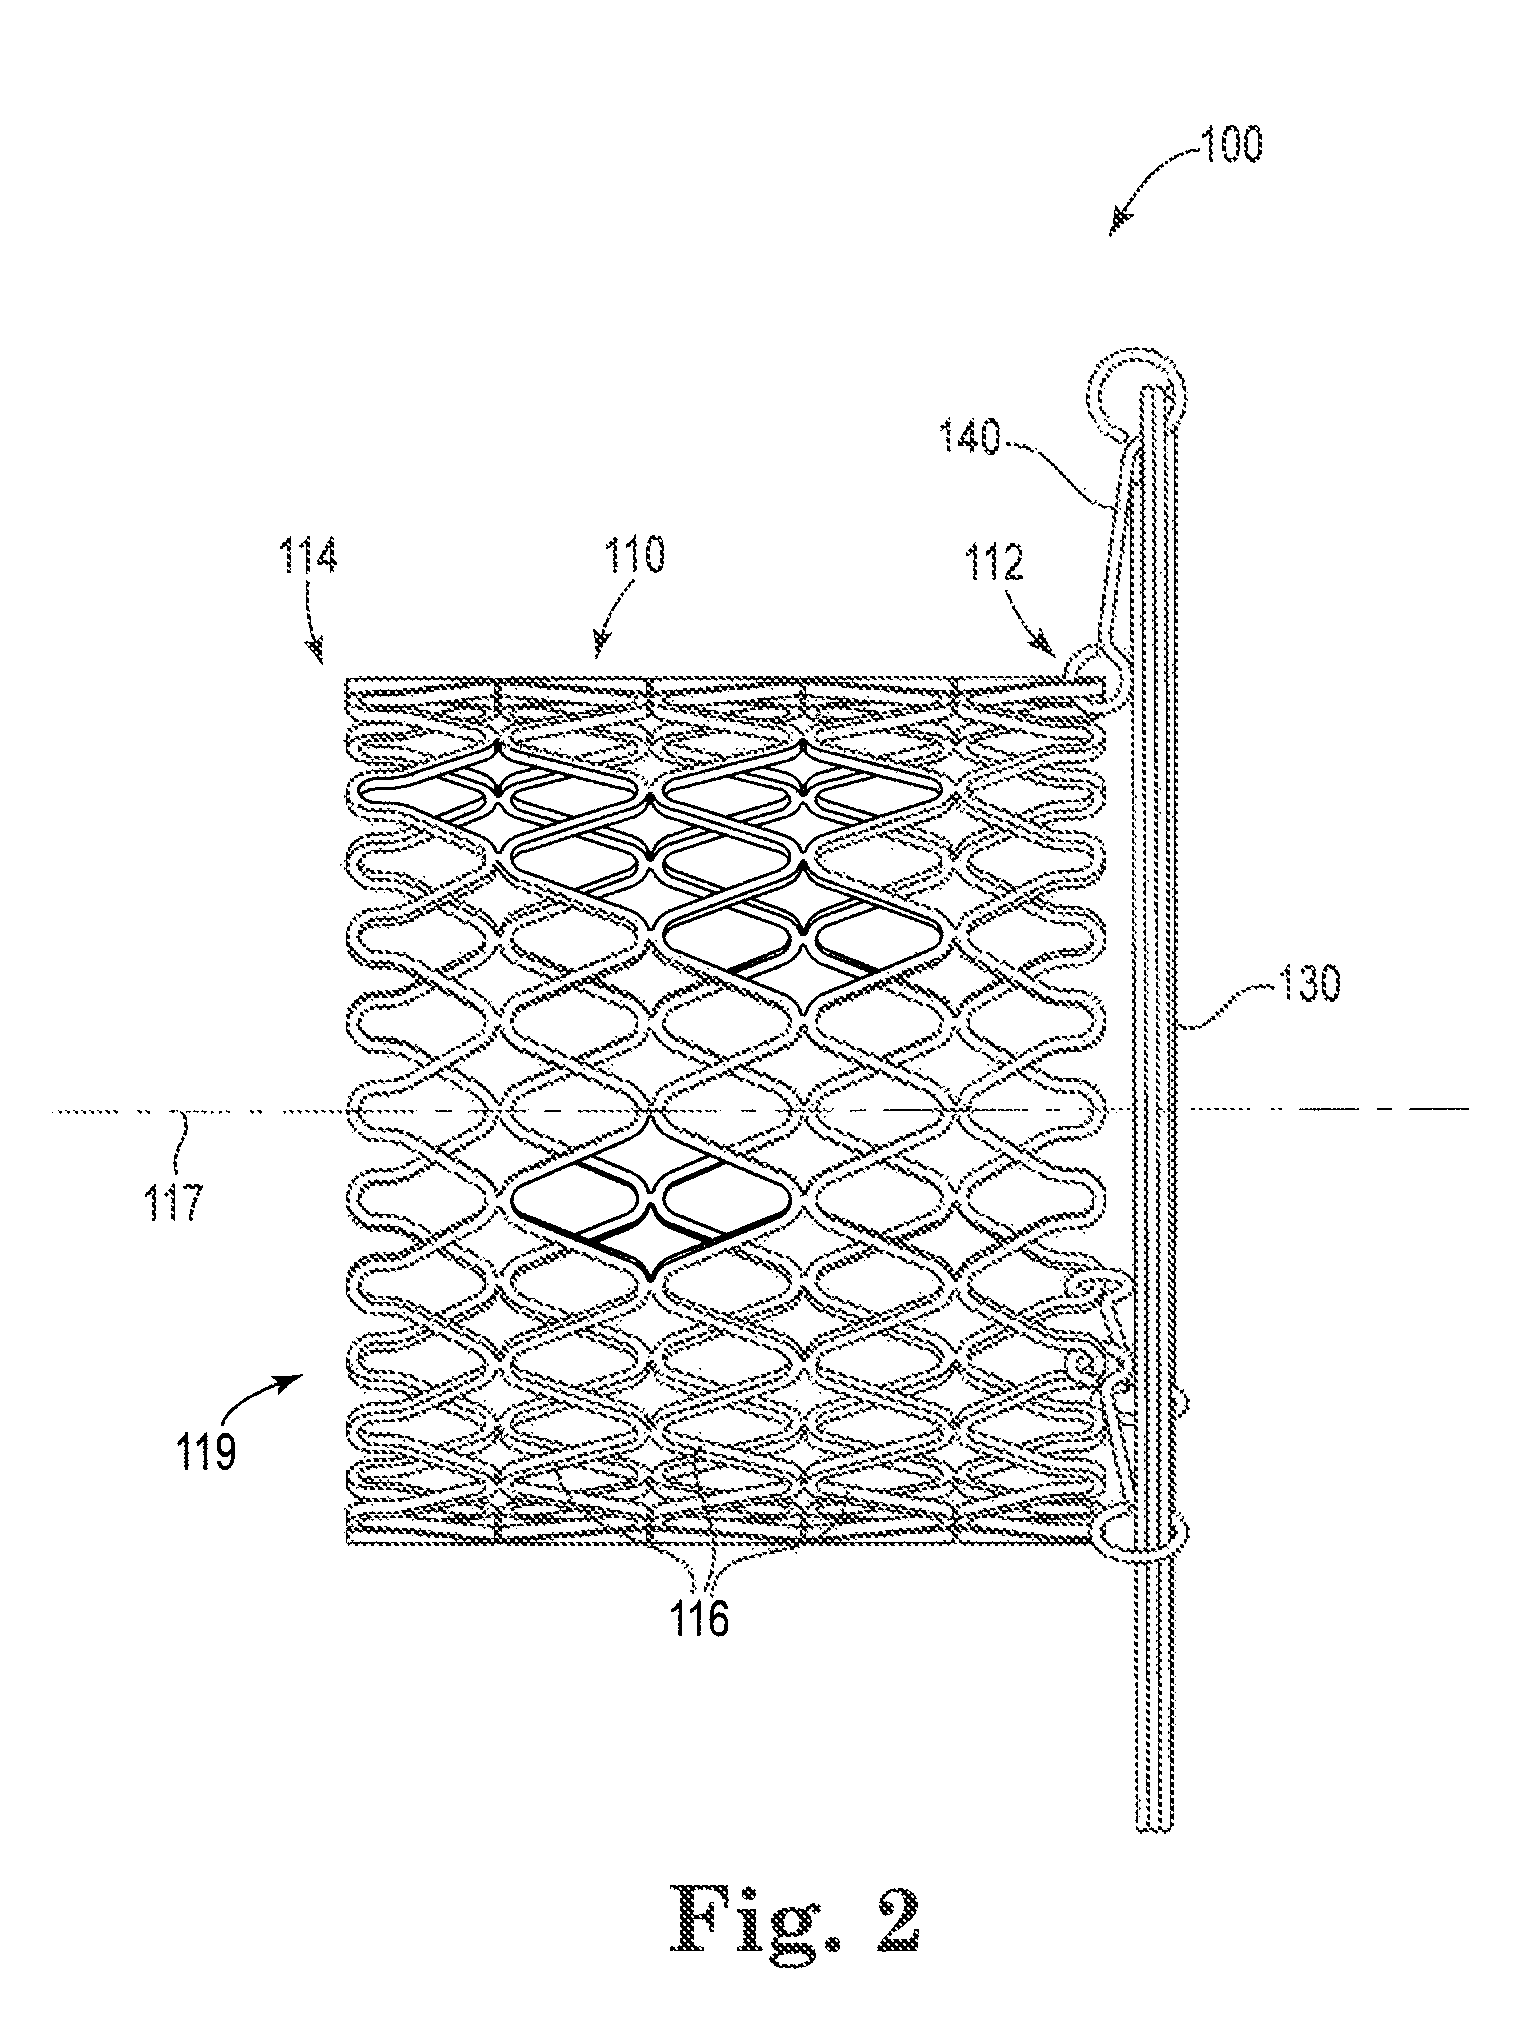 Transcatheter valve with torsion spring fixation and related systems and methods